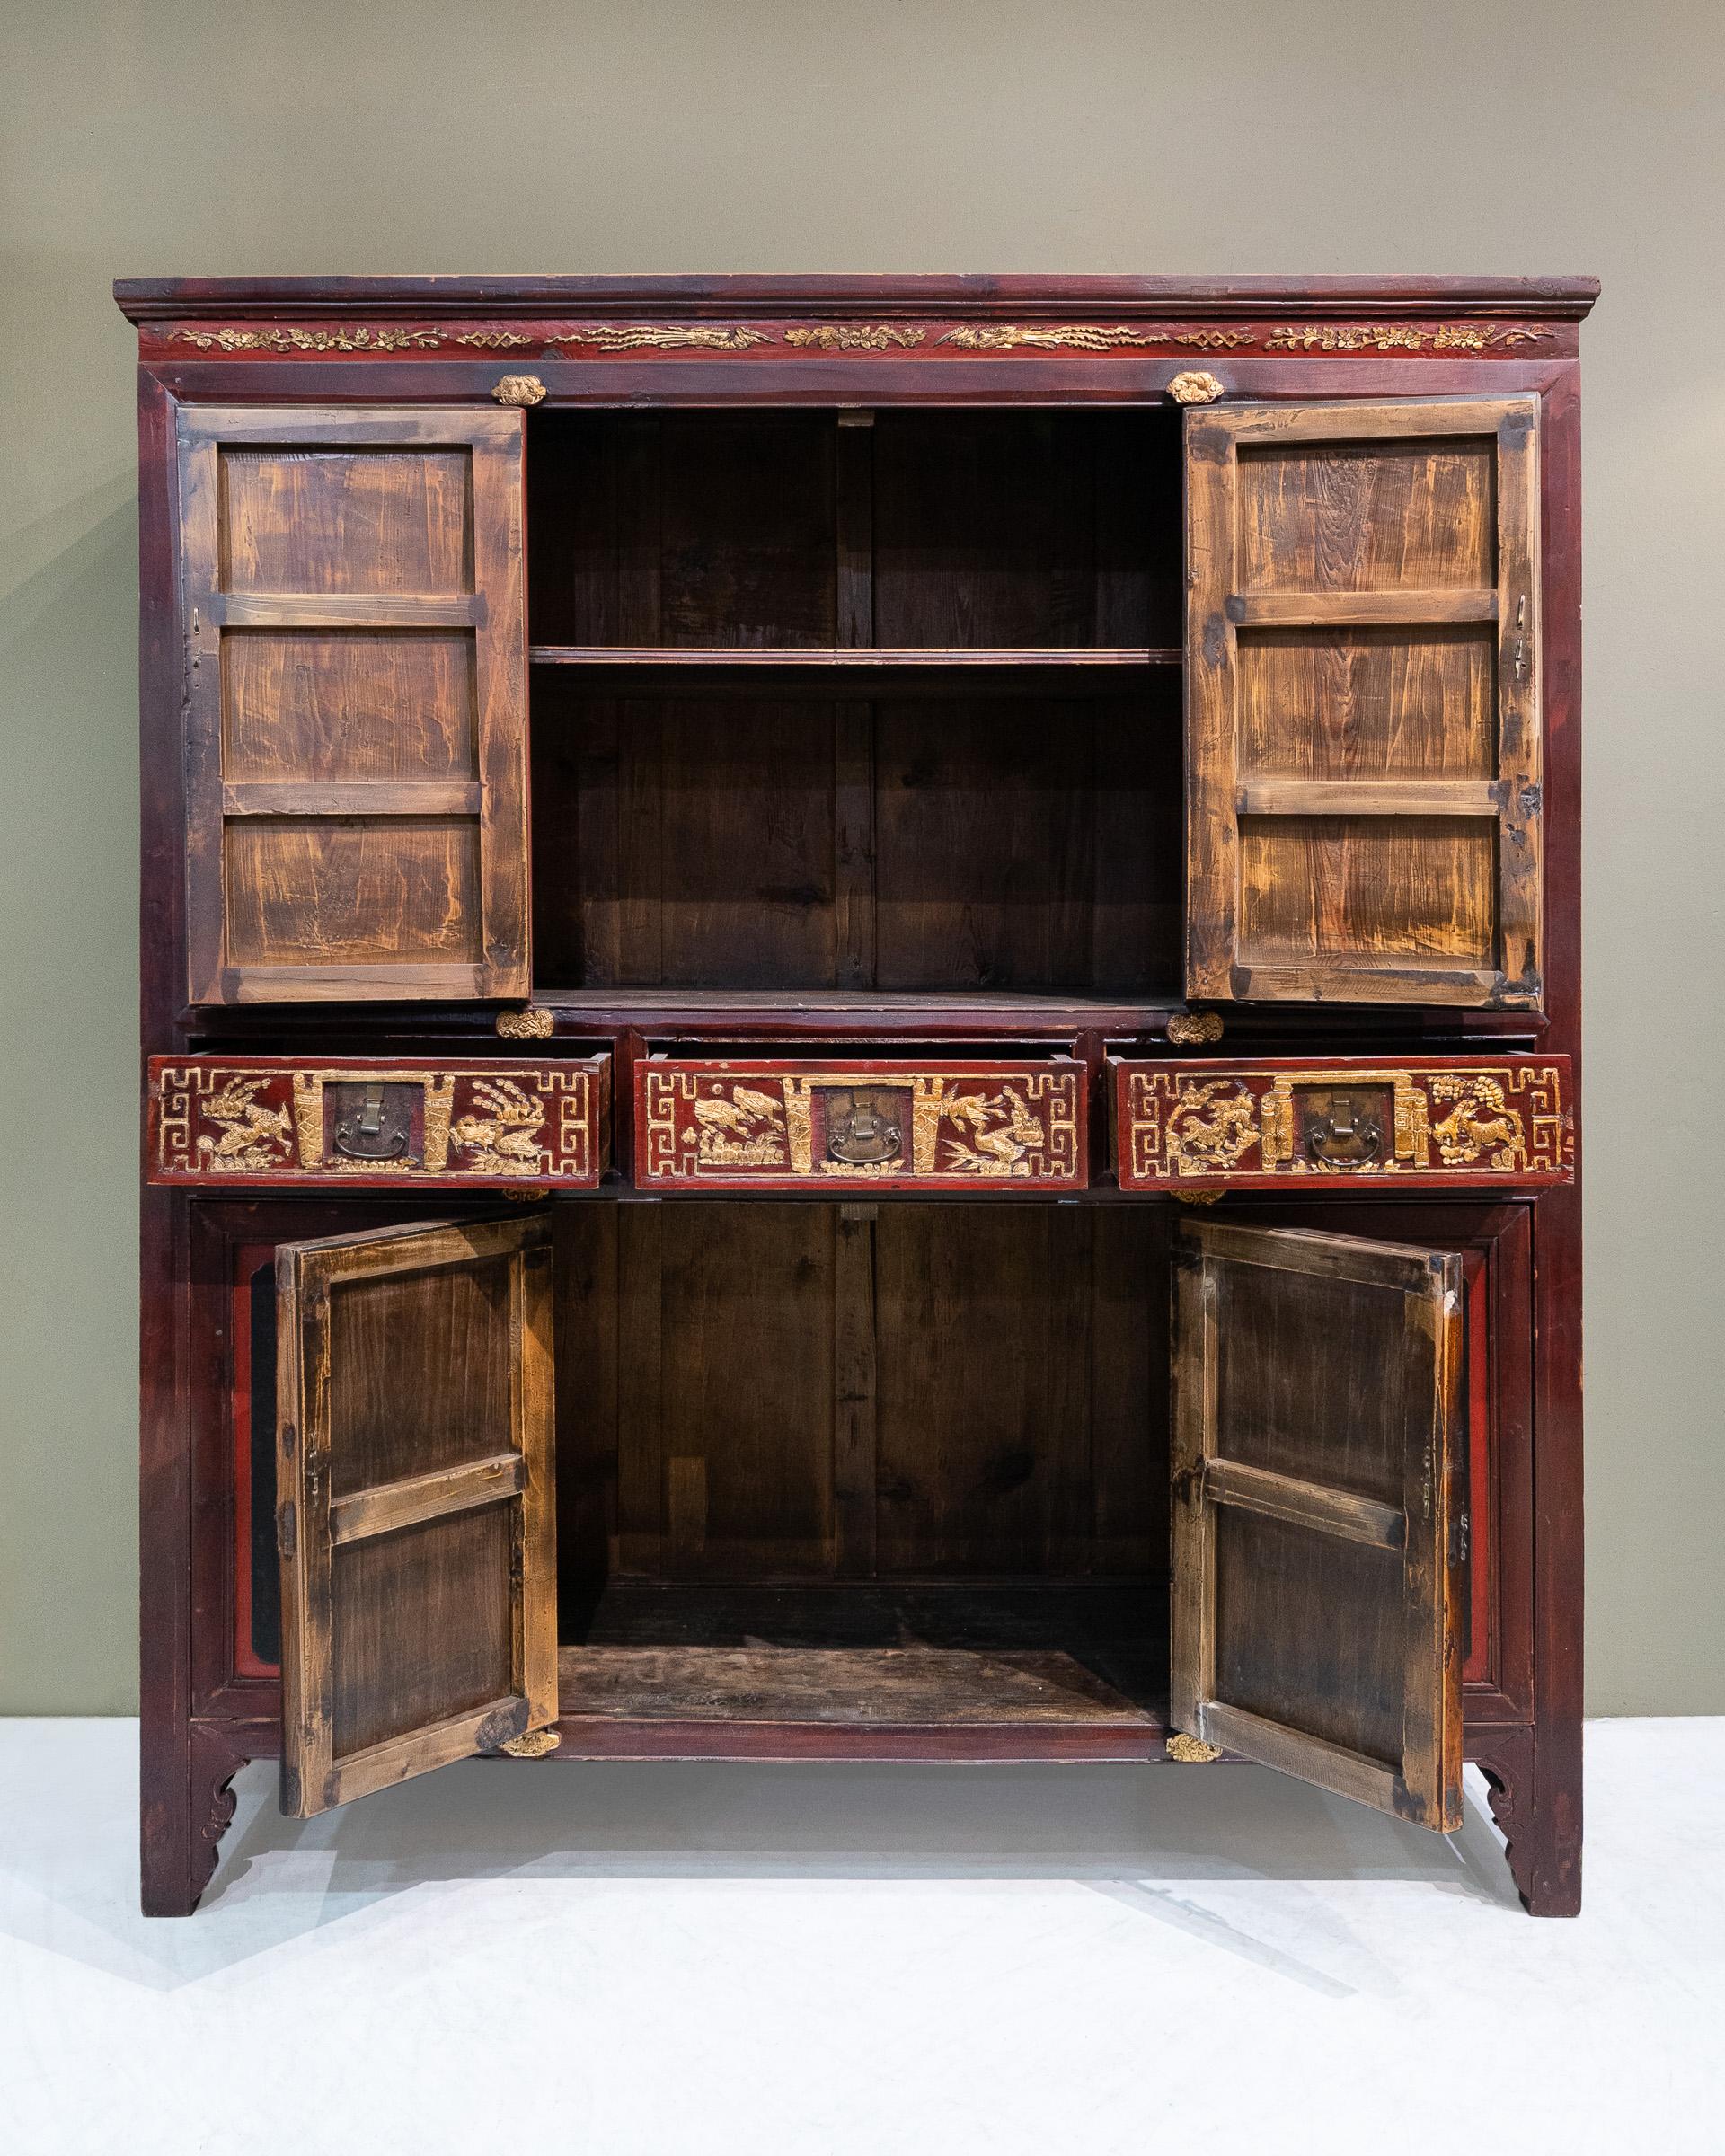 A late 19th century large carved cabinet from Dong Yang city, Zhejiang province, China. This cabinet is a distinct design of cabinets from this region, who are famed for their wood carvings. For both the top and bottom sections, only the middle